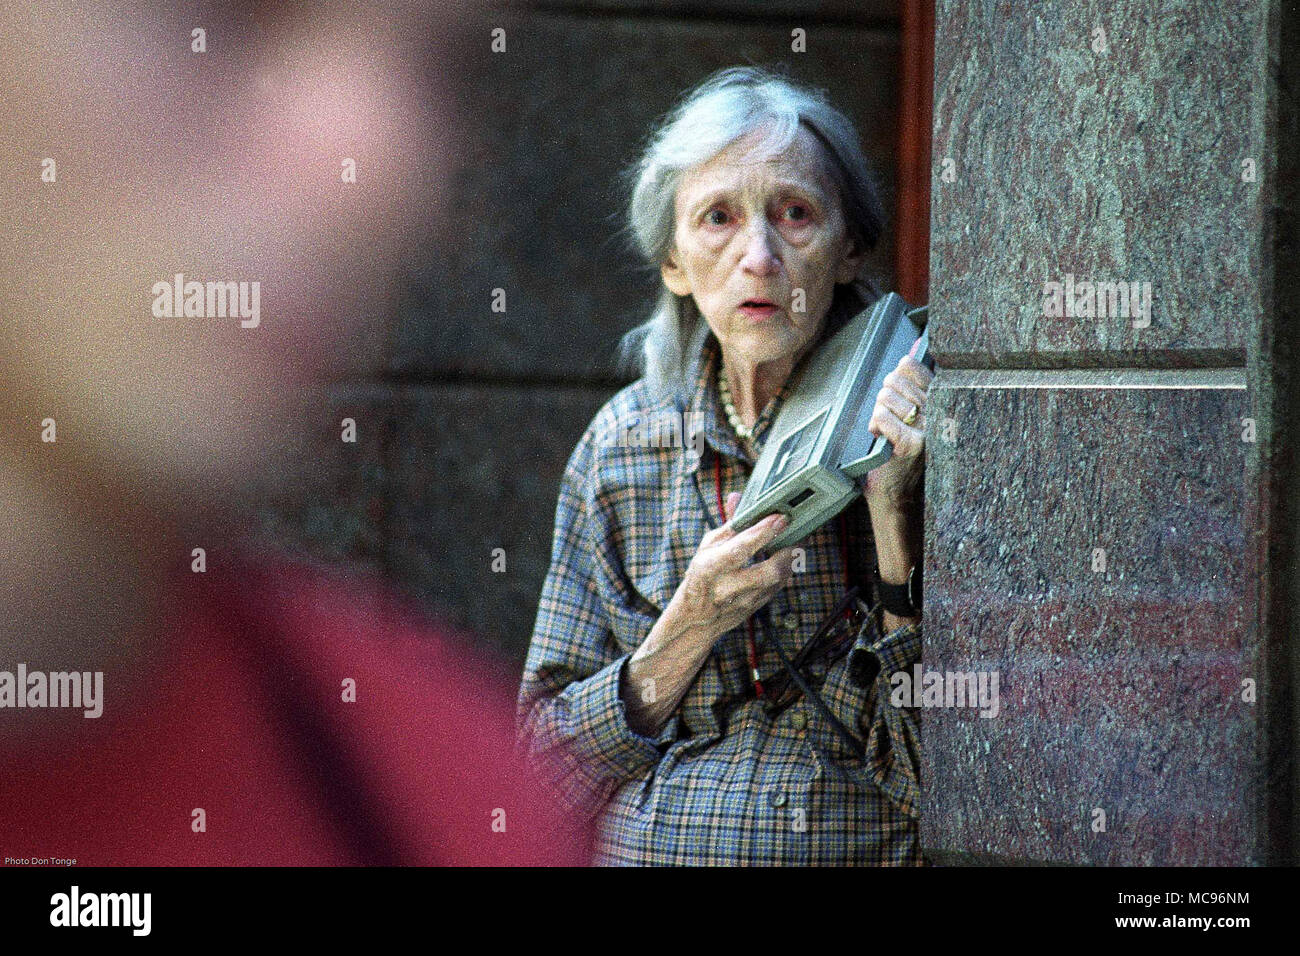 Elderly female in shock and disbelief while listening to news updates on her radio a few hours after the terrorist attack on The World Trade Center New York City on 9/11   photo DON TONGE Photographer Stock Photo